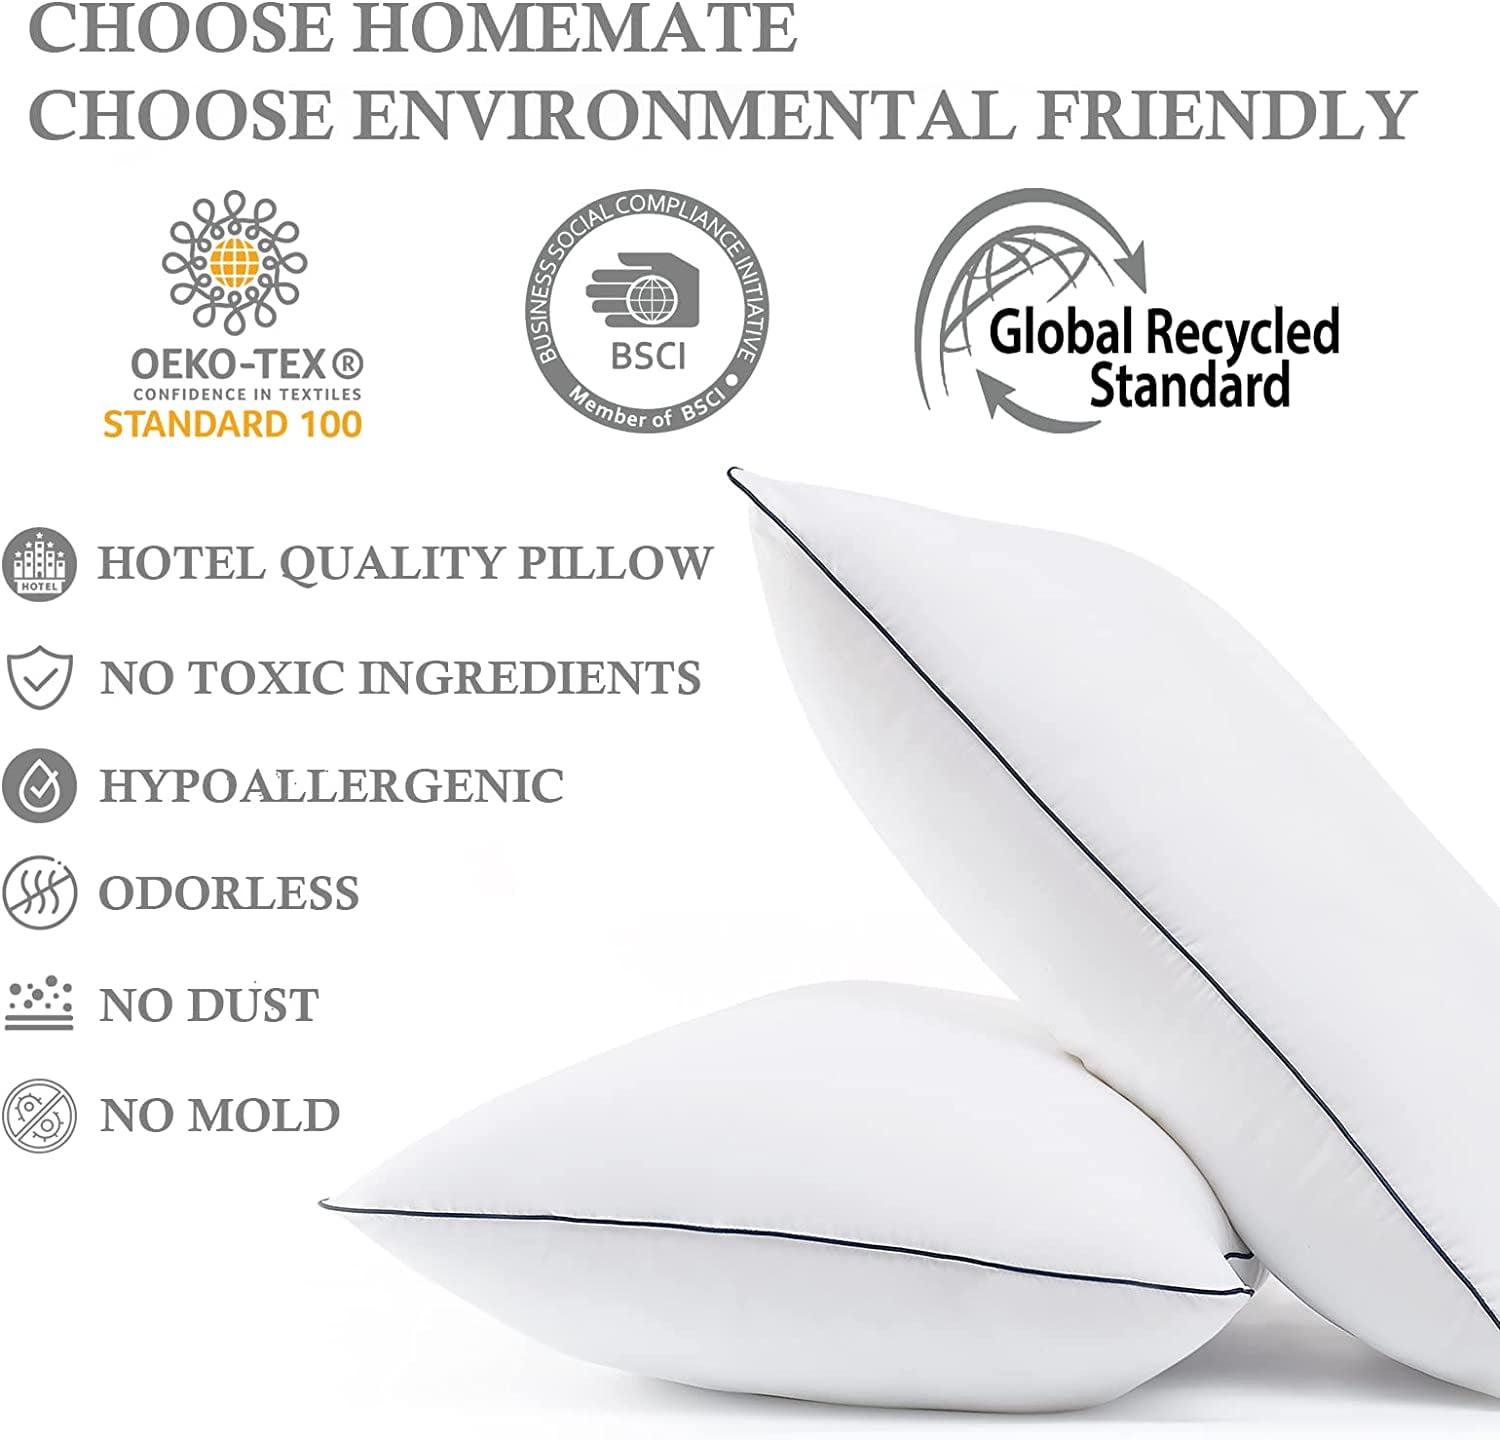 Bed Pillows For Sleeping，Luxury Hotel Collection Pillows,Down Alternative  Gel Fluffy Cooling Pillow,Queen Size (20X30) Set Of 2，Soft And Supportive  Pillows For Back, Stomach Or Side Sleepers,White 